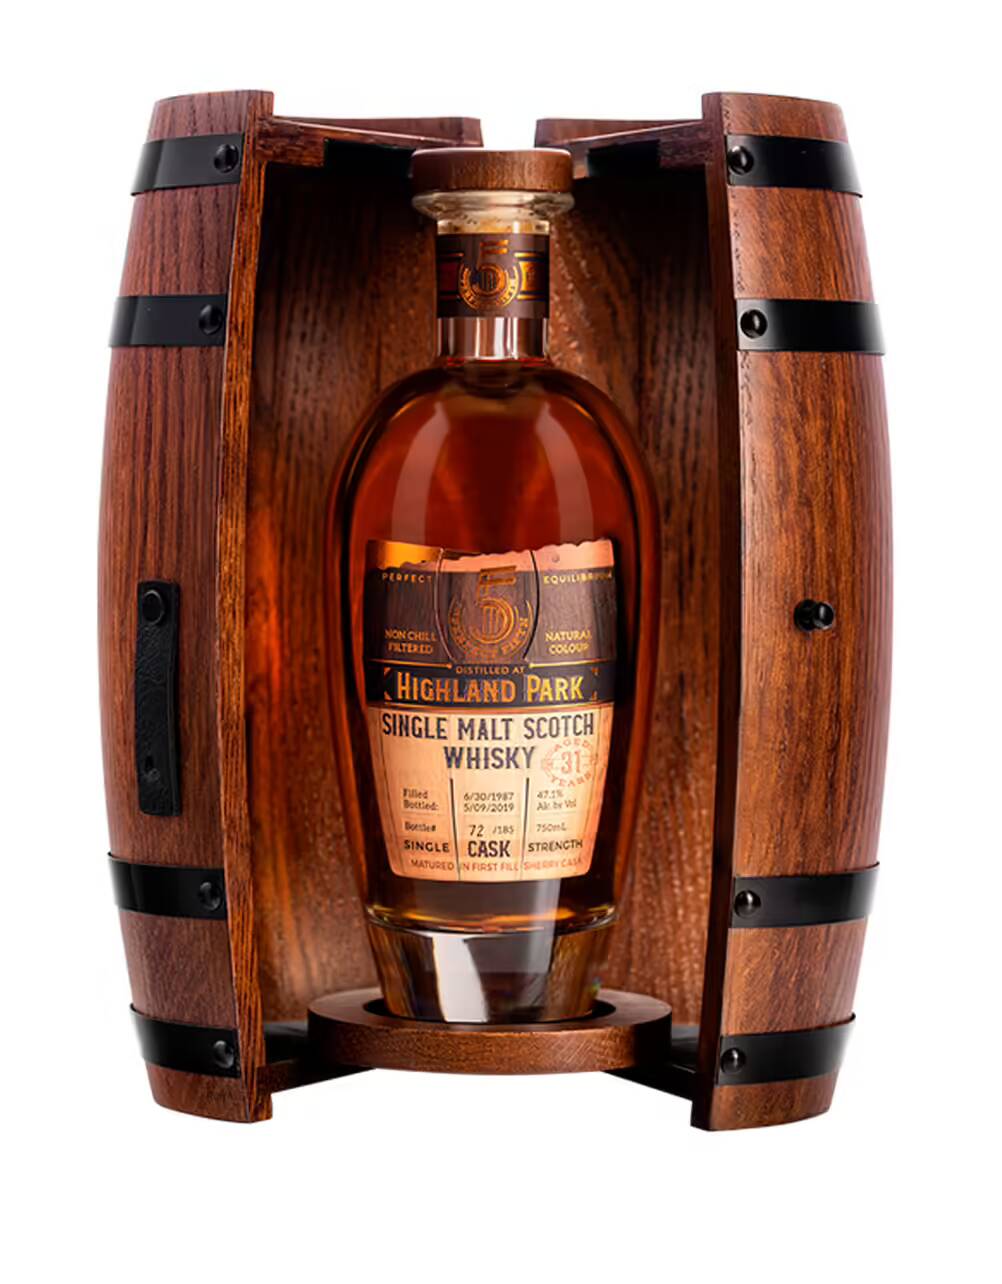 The Perfect Fifth 31 Year Old Highland Park Single Malt Scotch Whisky